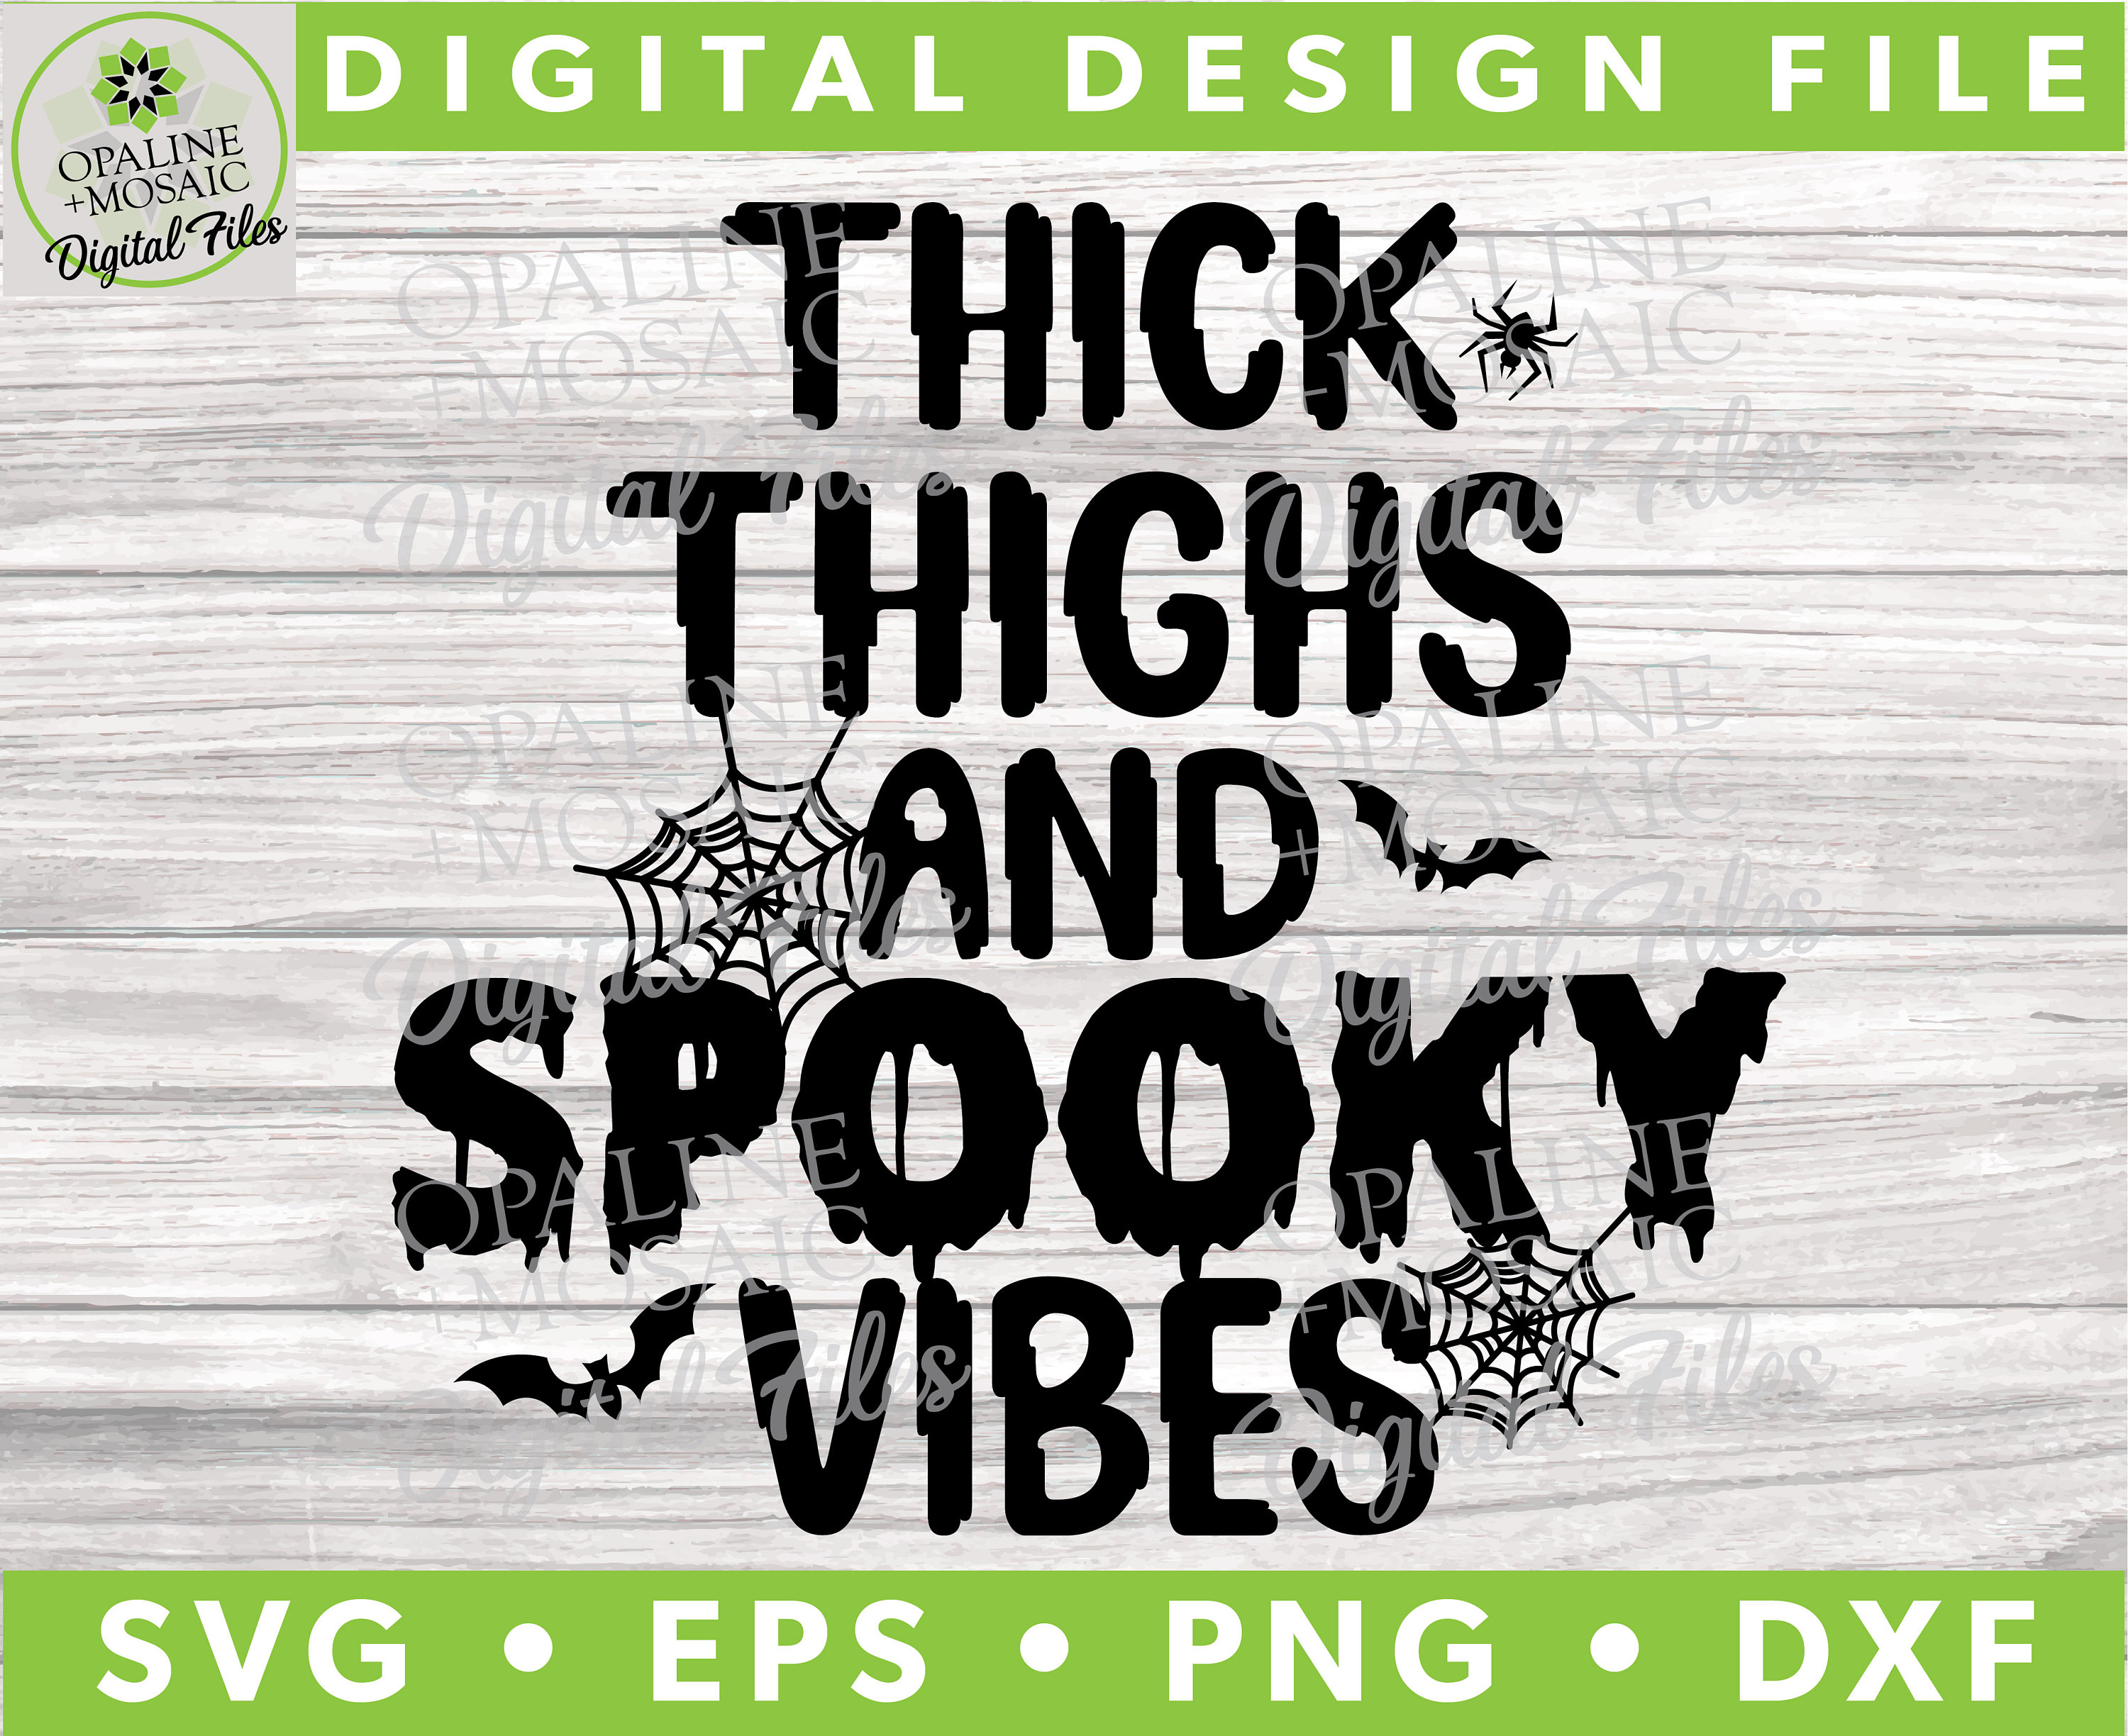 Thick Thighs Thin Patience SVG Digital File -  Canada